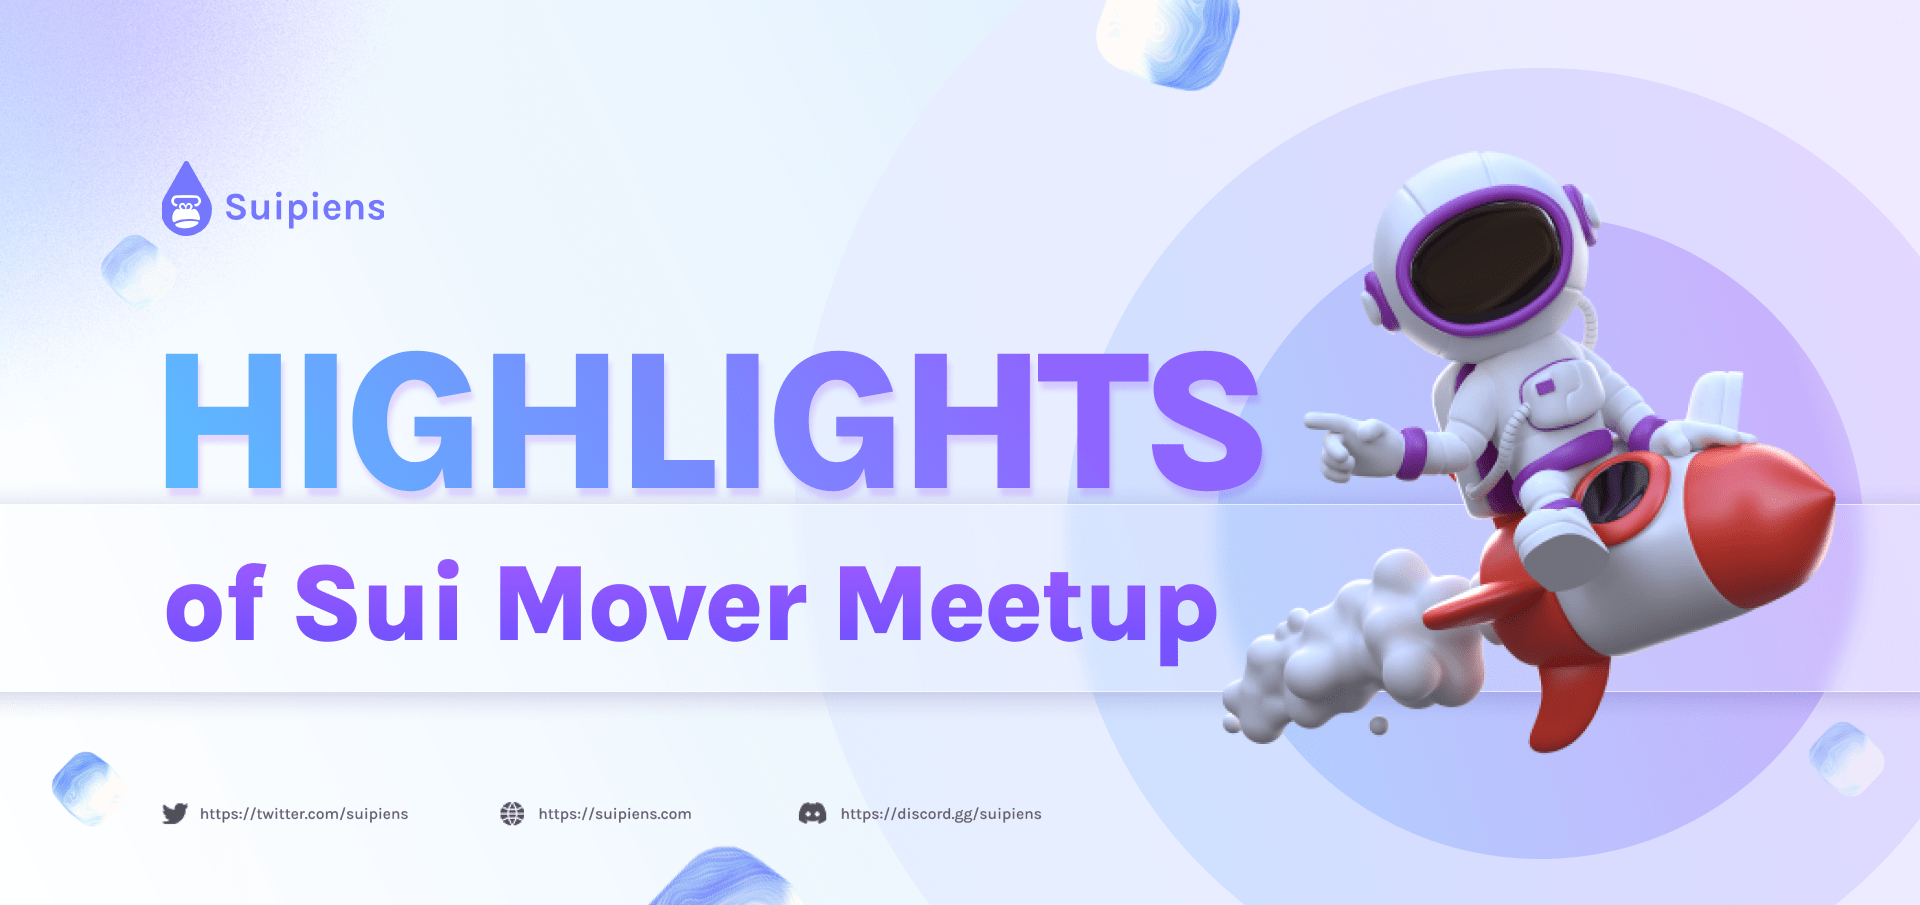 Highlights of Sui Mover Meetup